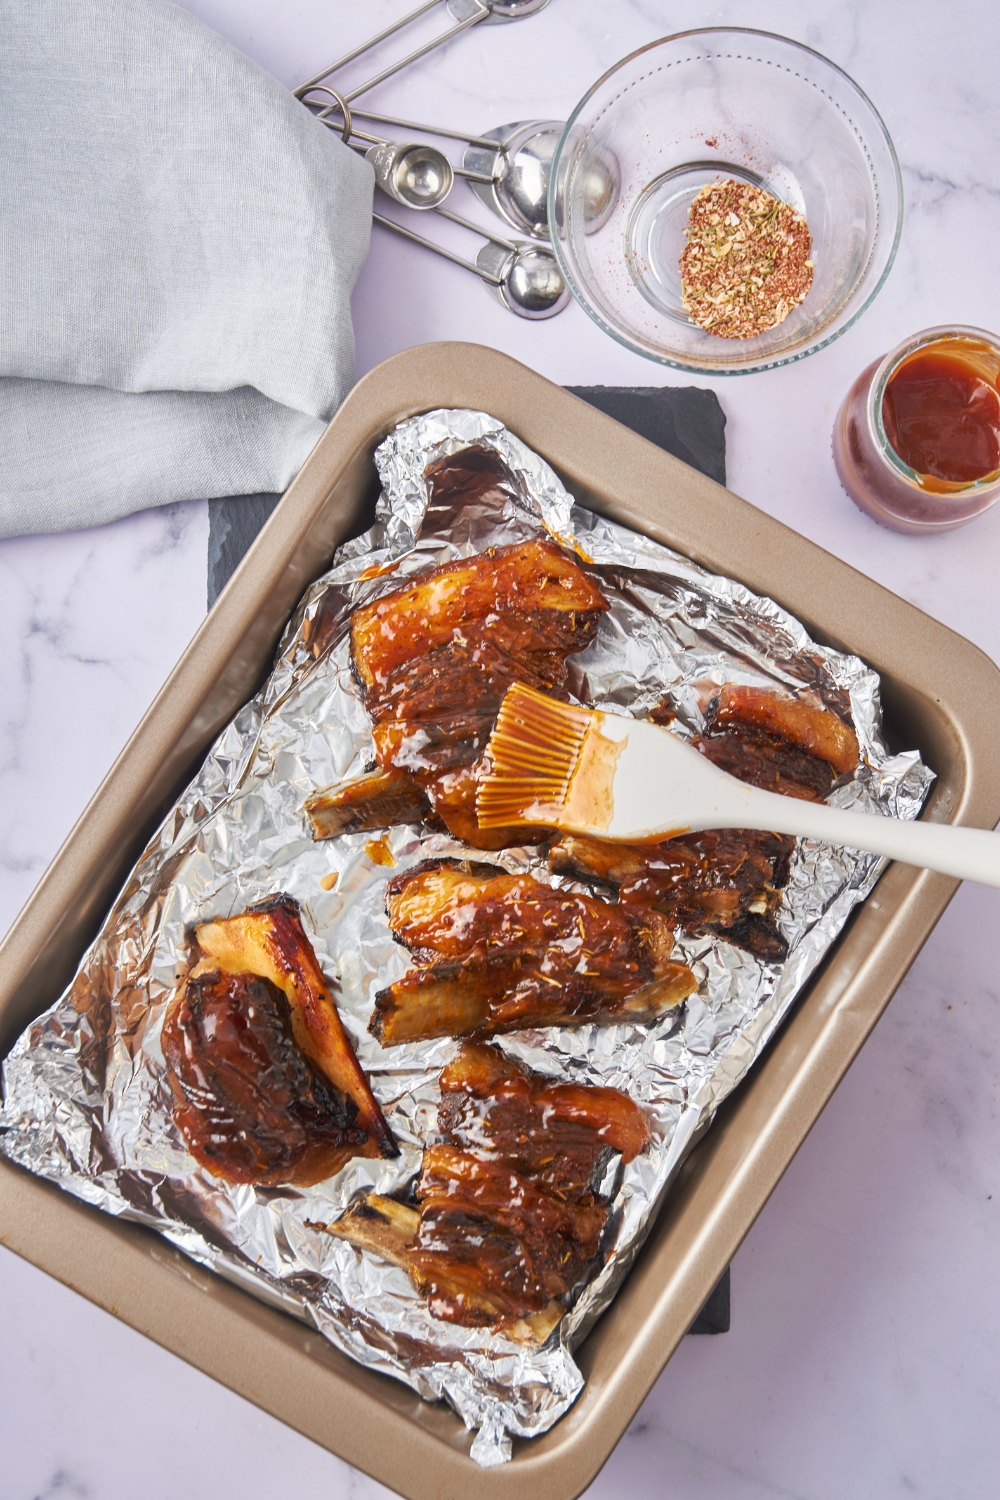 Five beef back ribs coated in BBQ sauce spread evenly in a baking dish lined with foil and a silicone basting brush is brushing sauce on the ribs.